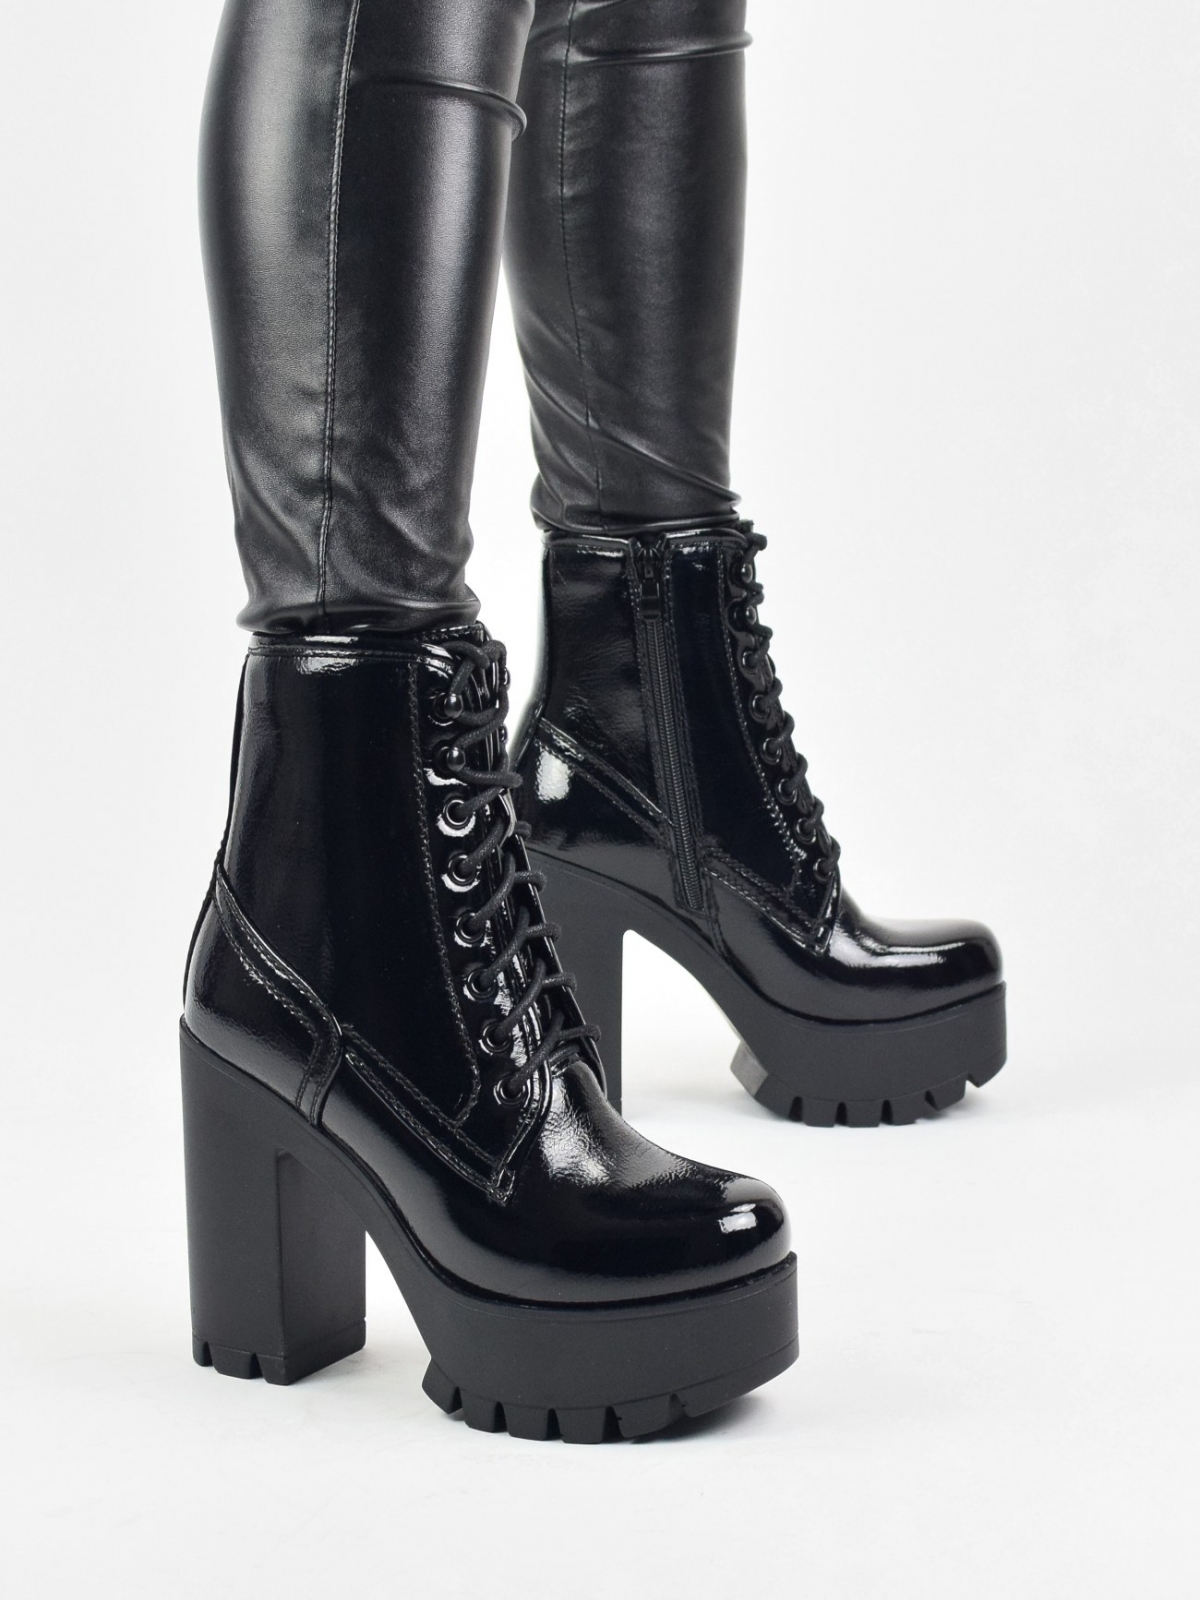 Fat block heeled lace up platform boots with side zip in black patent